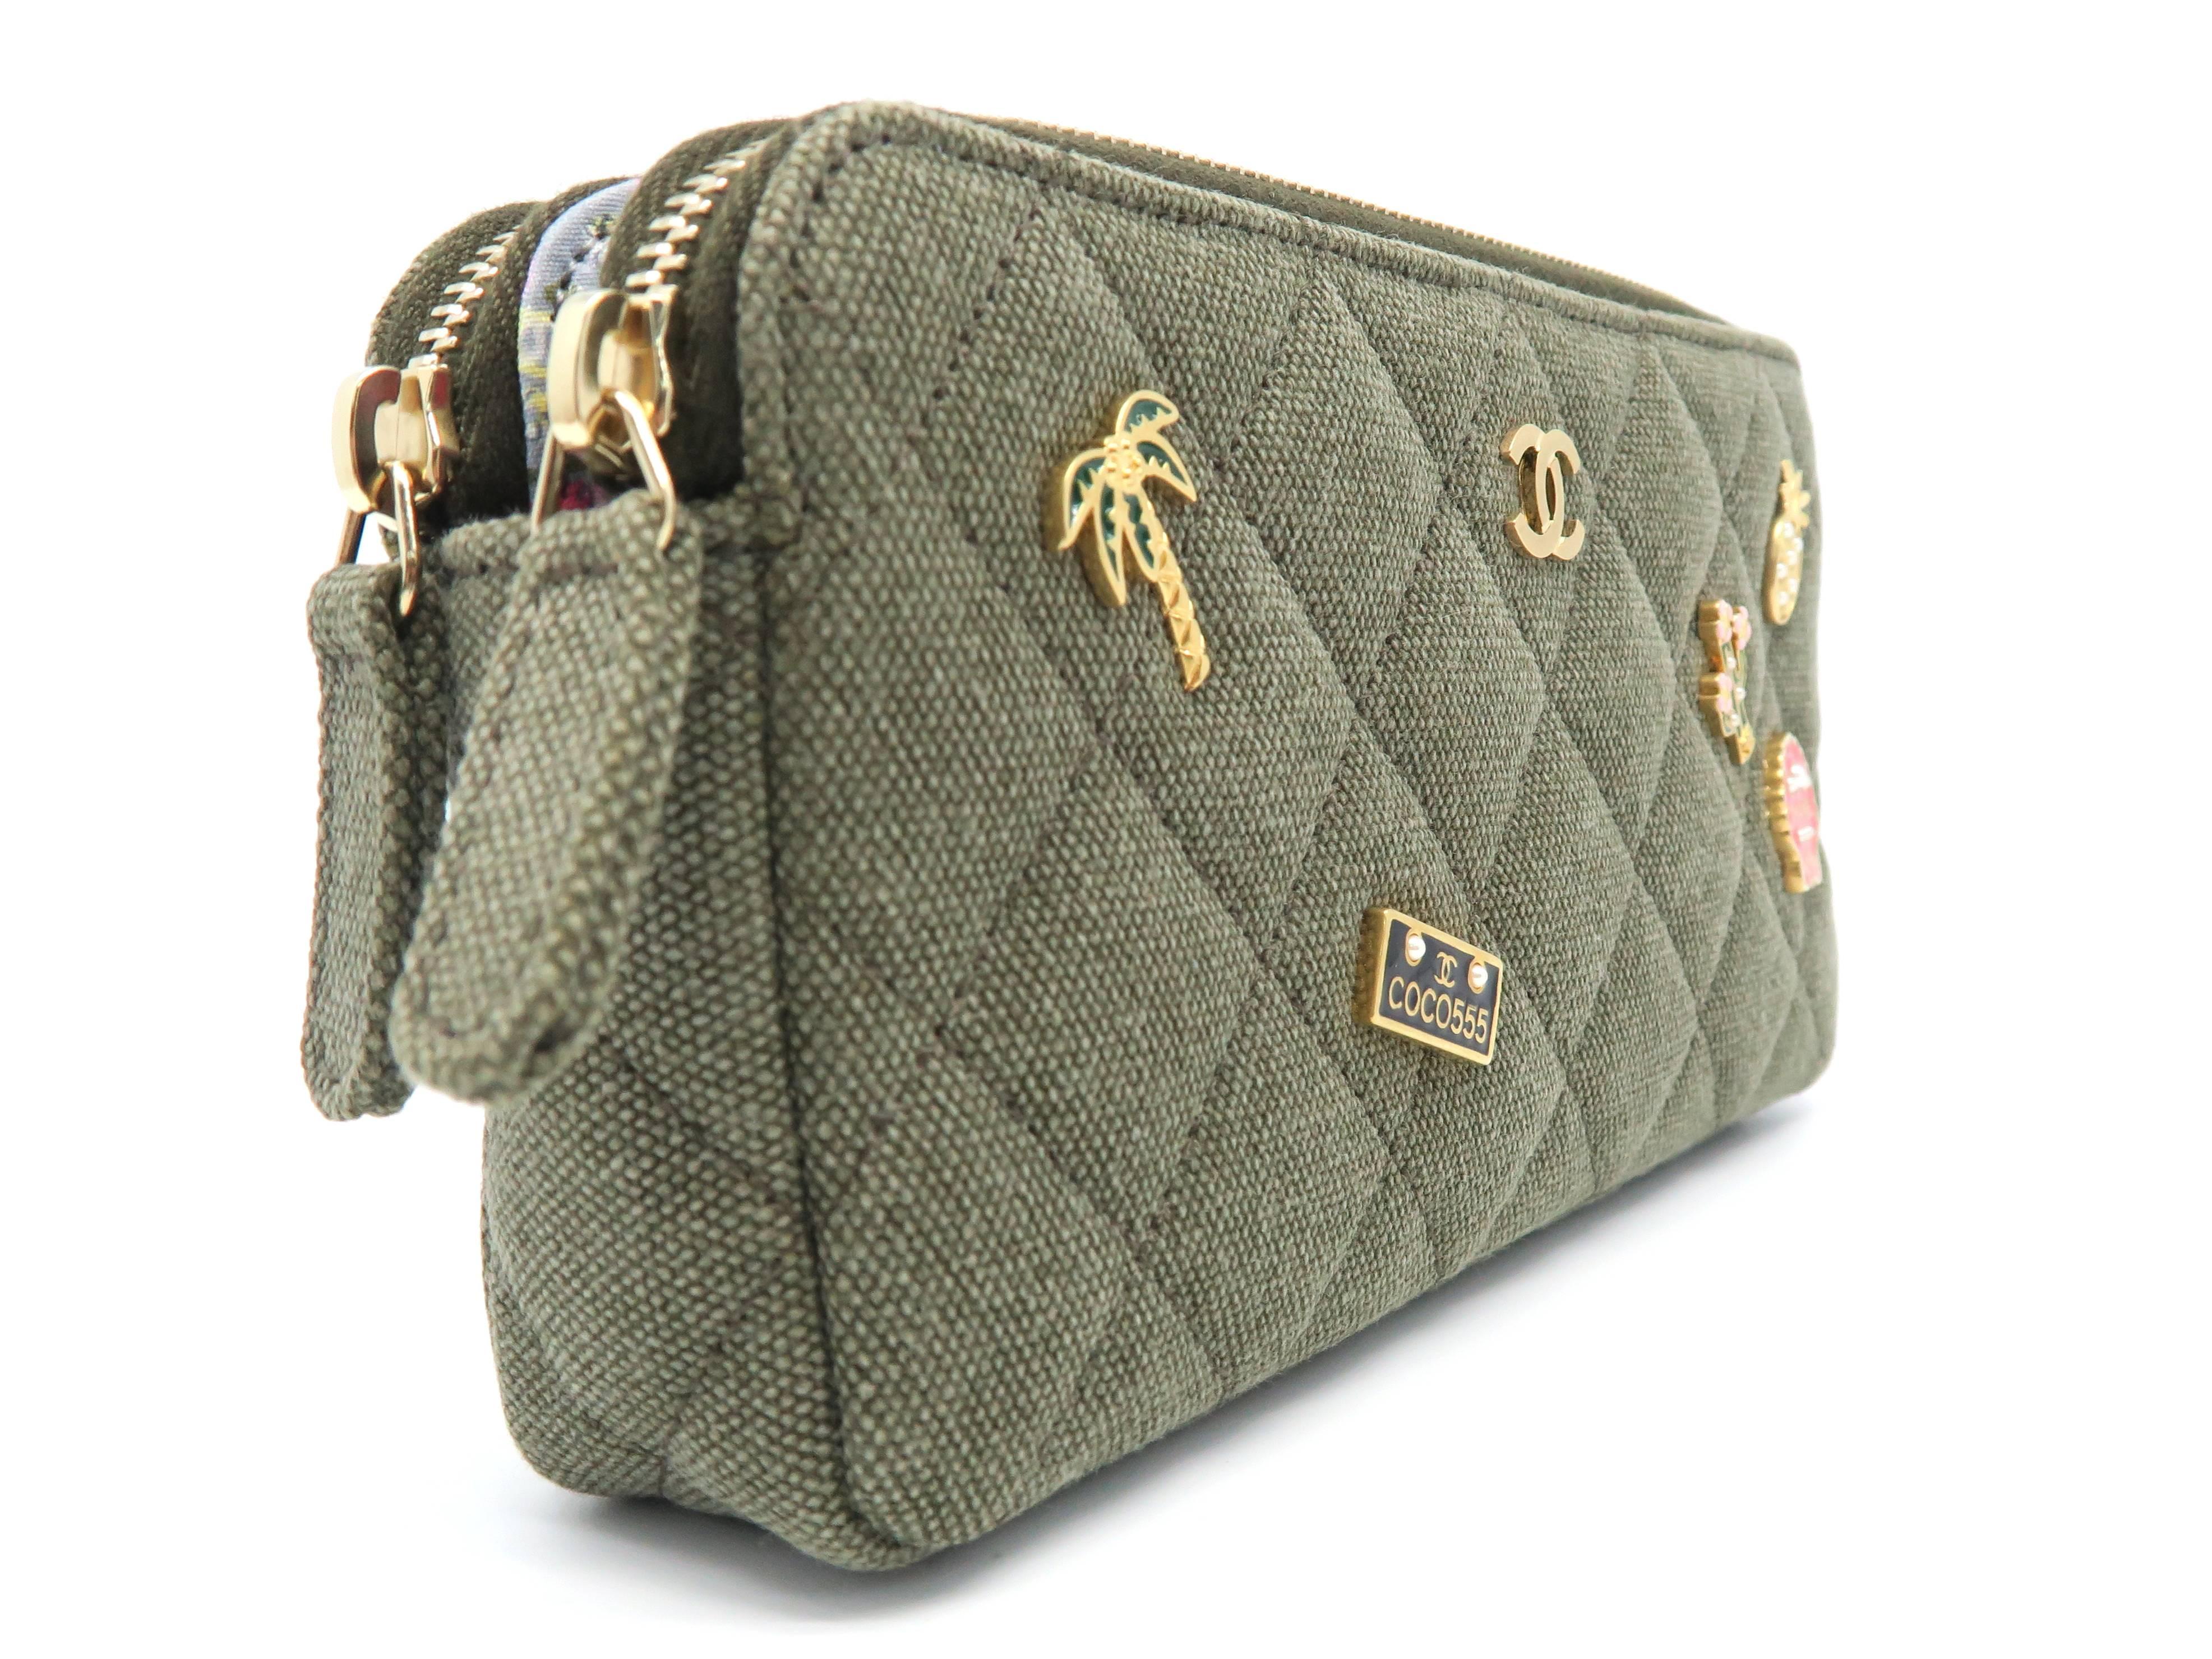 Color: Khaki

Material: Canvas

Condition: Rand N
Overall: Brand New
Surface:Good
Corners:Good
Edges:Good
Handles/Straps:Good
Hardware:Good

Dimensions: W18 × H9 × D3cm（W7.0" × H3.5" × D1.1"）
Shoulder strap:130cm（51.1"）

Serial